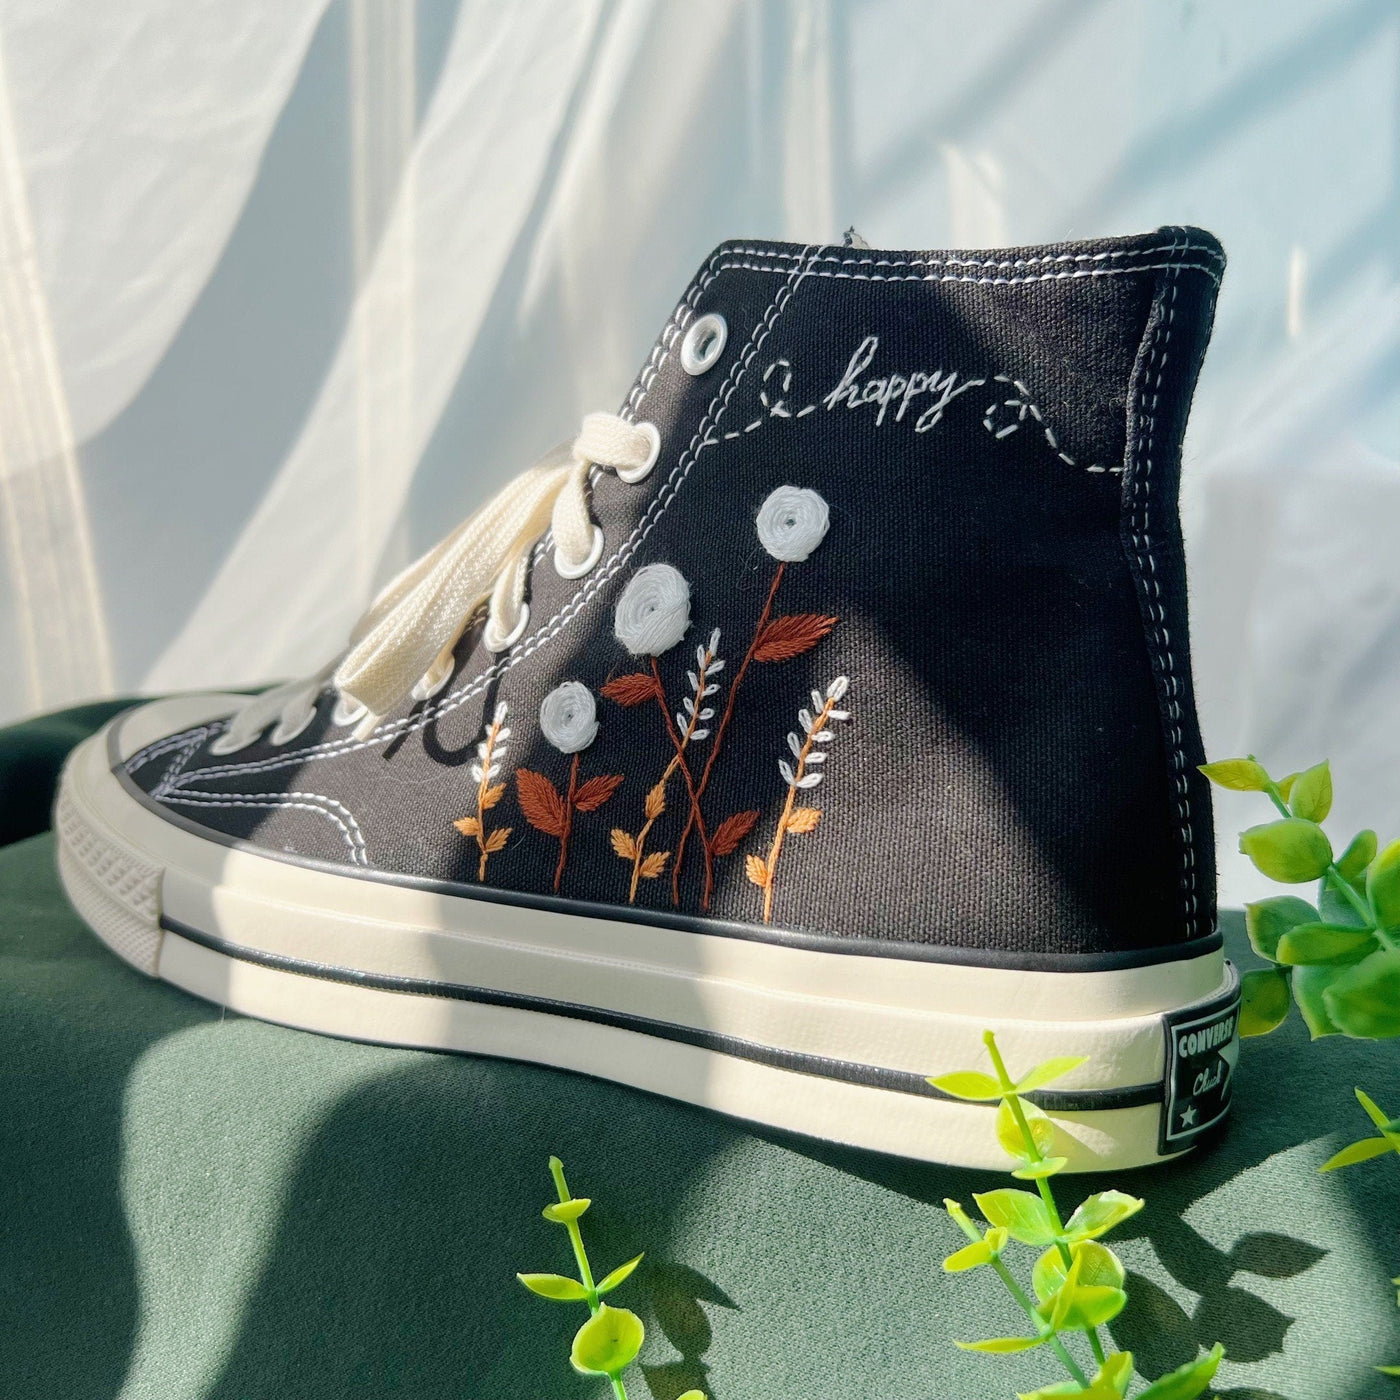 Converse High Tops,Embroidered Shoes,Embroidered White Sweet Rose